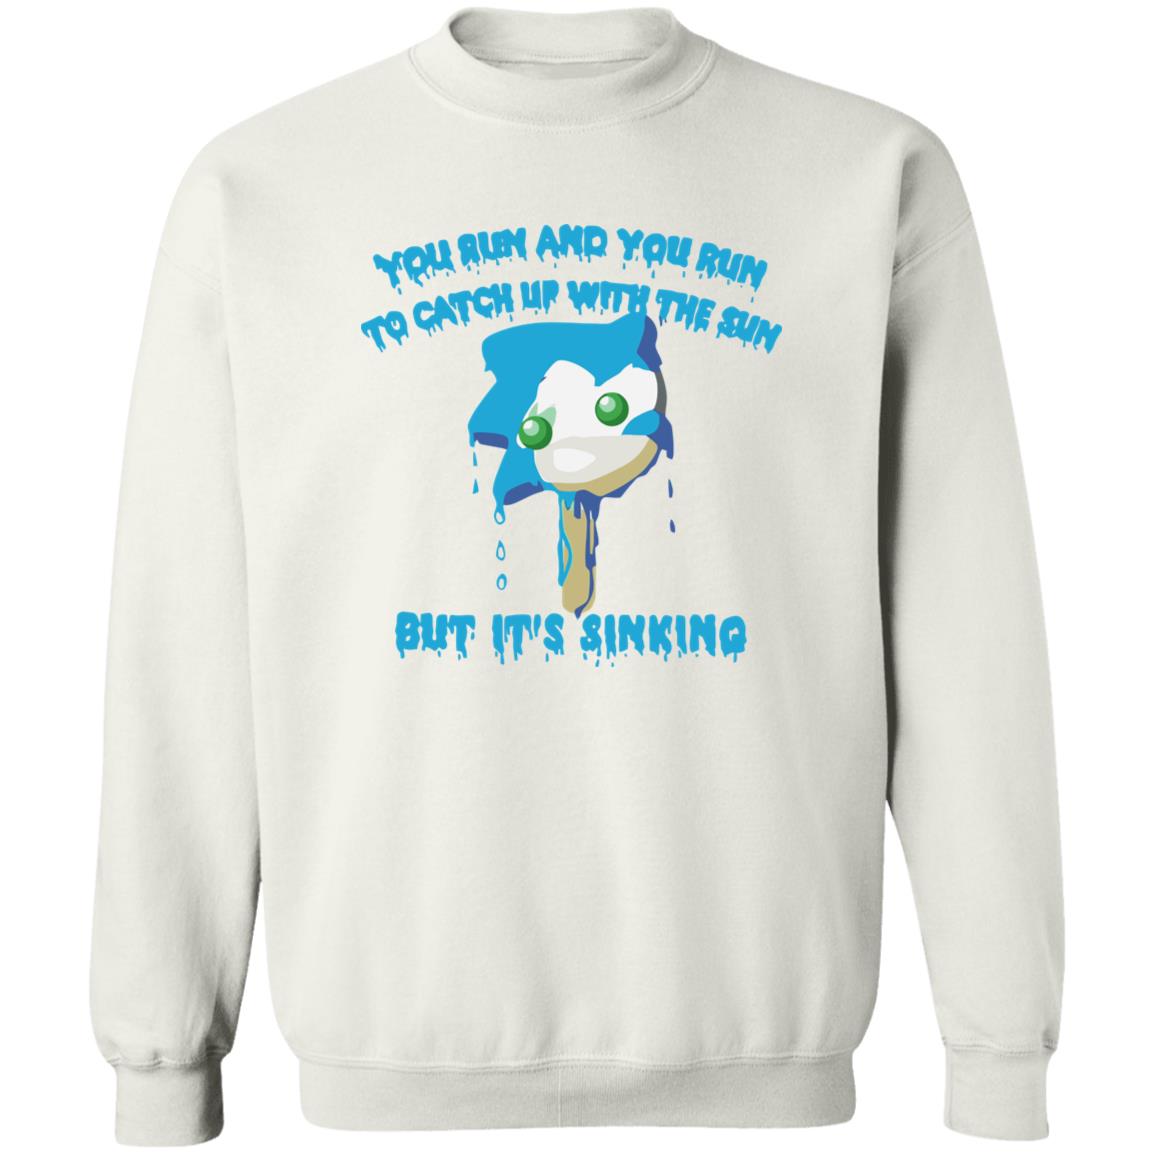 Sonic You Run And You Run To Catch Up With The Sun But It’s Sinking Shirt 1